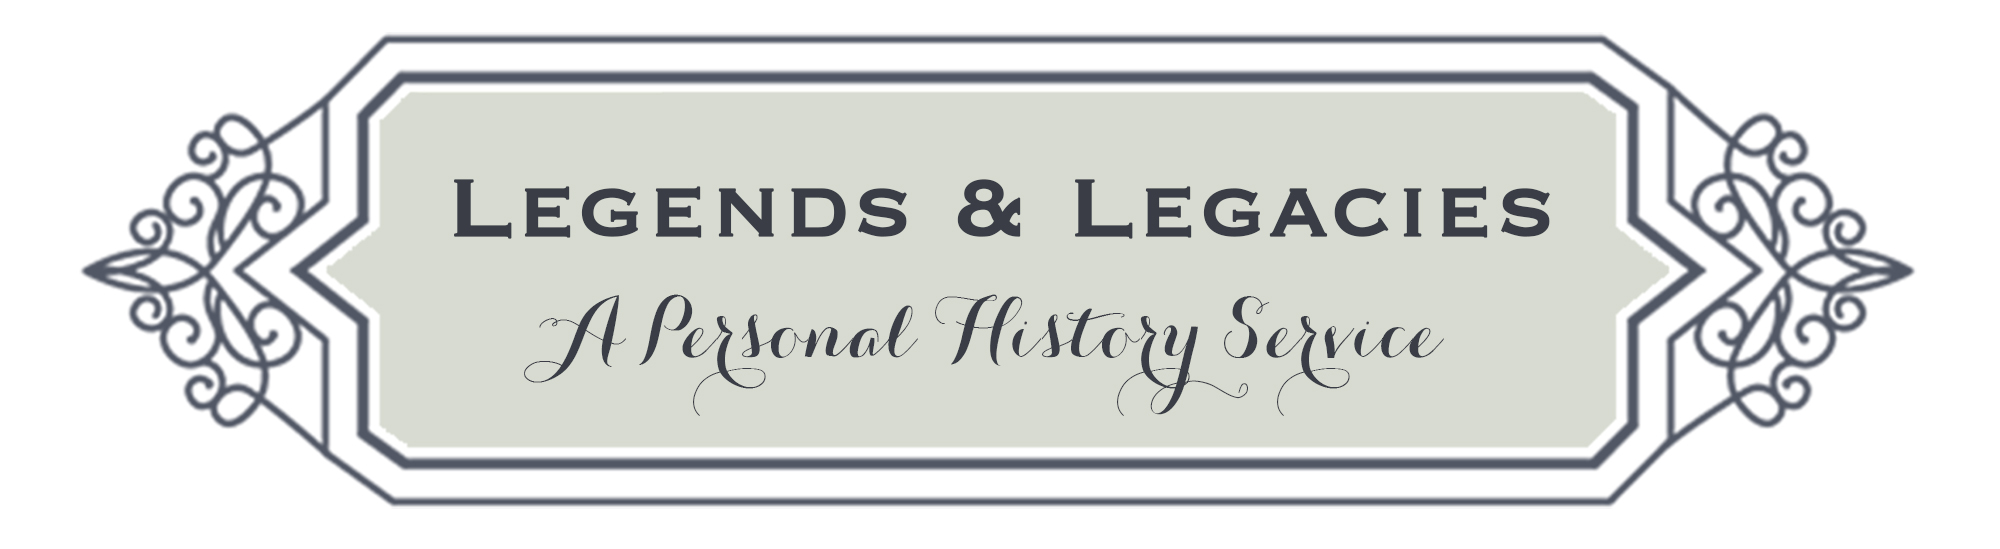 Legends &amp; Legacies - a personal history service in Southern California